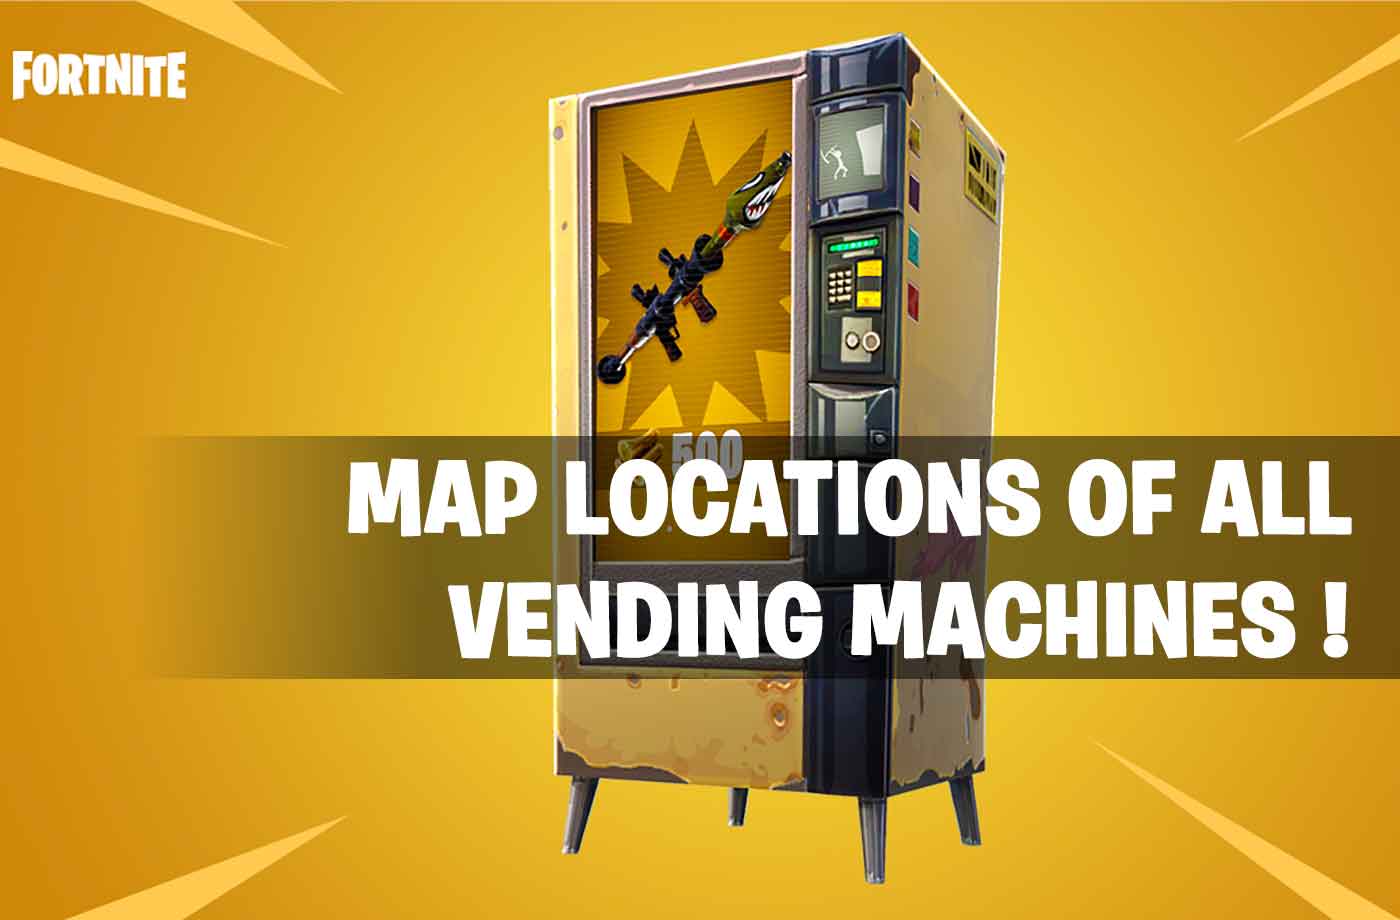 fortnite battle royale map locations of all vending machines - where are there vending machines in fortnite